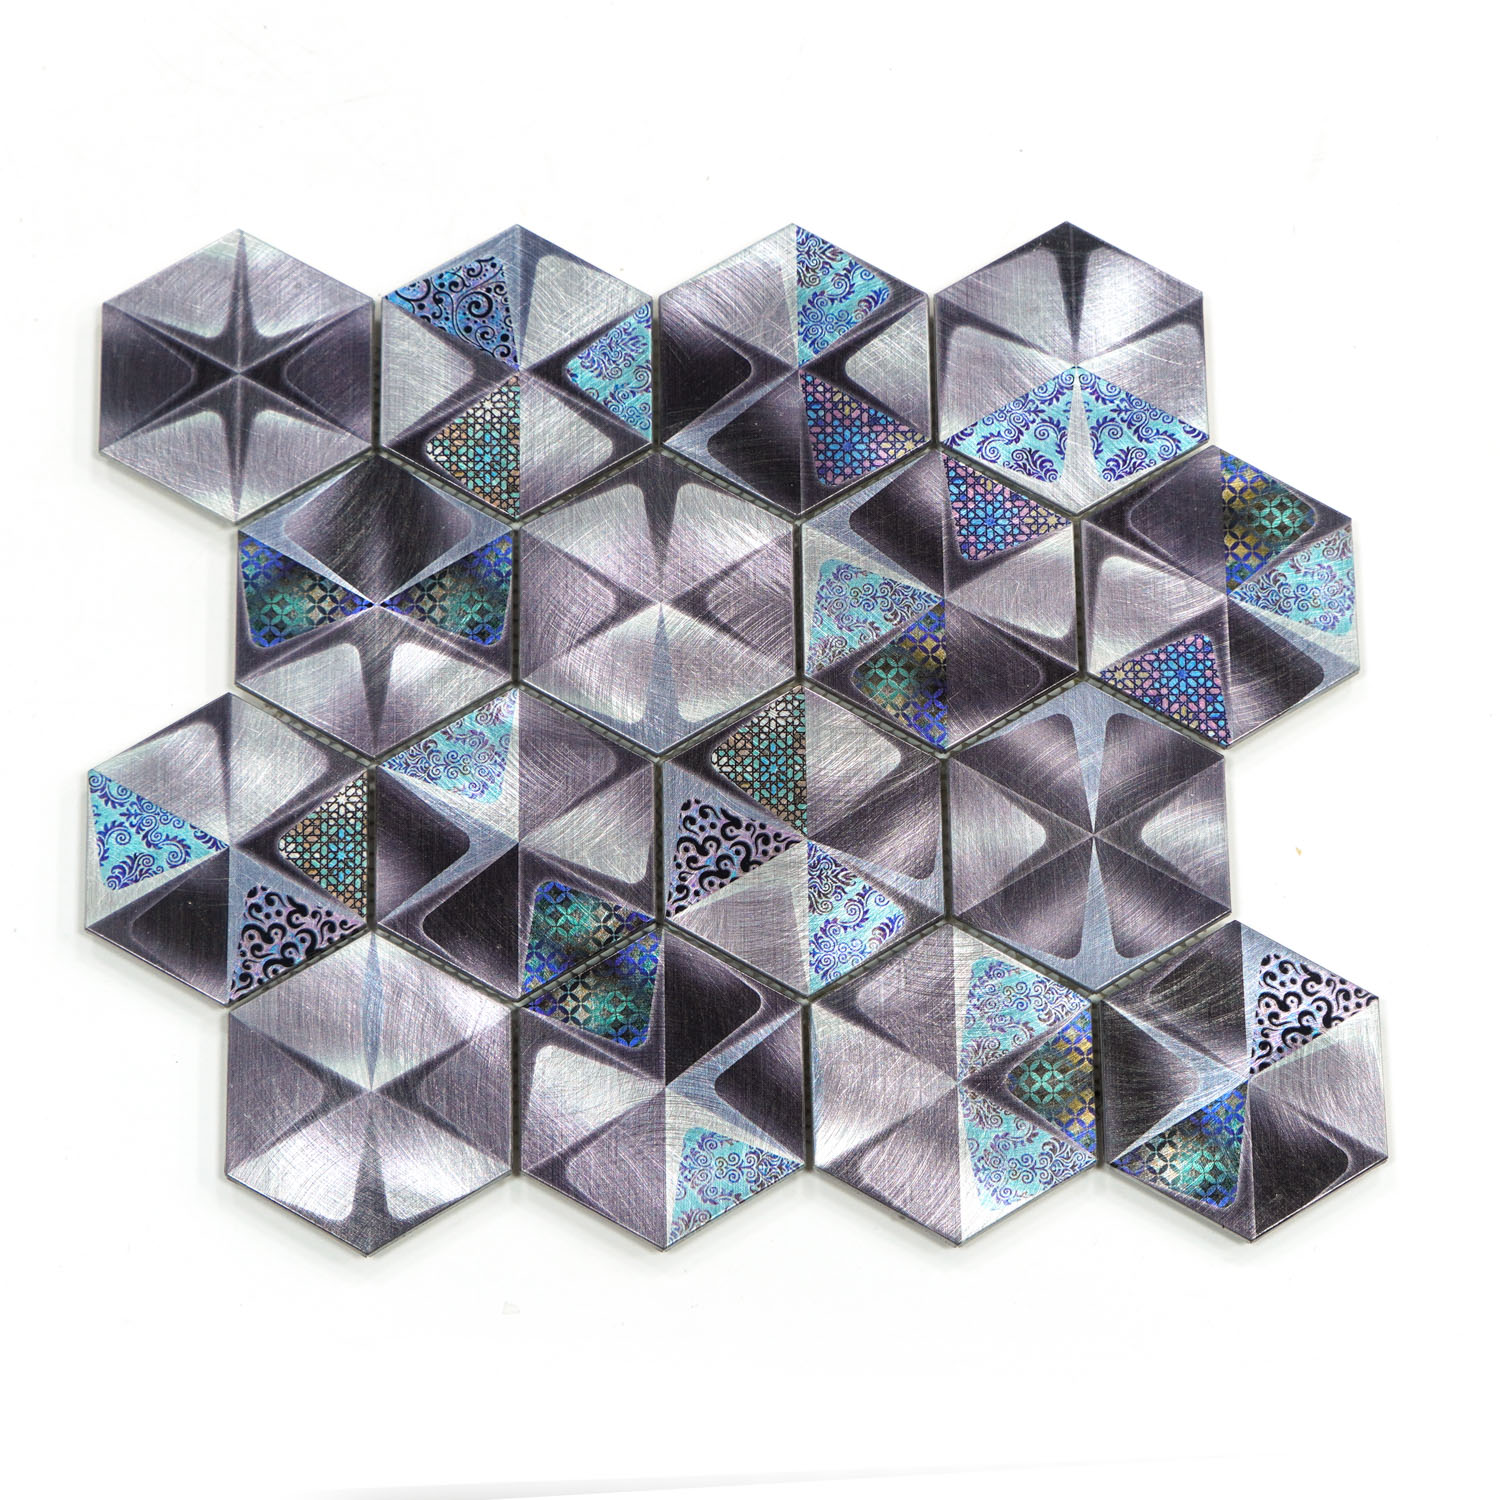 New Delivery for Stone Mosaic Can Be Used In A Wide Range Of Areas - Modern Decoration grey  color 3D Glossy Design Inkjet Printing Metal  Aluminum Mosaic Tiles  – Rockpearl